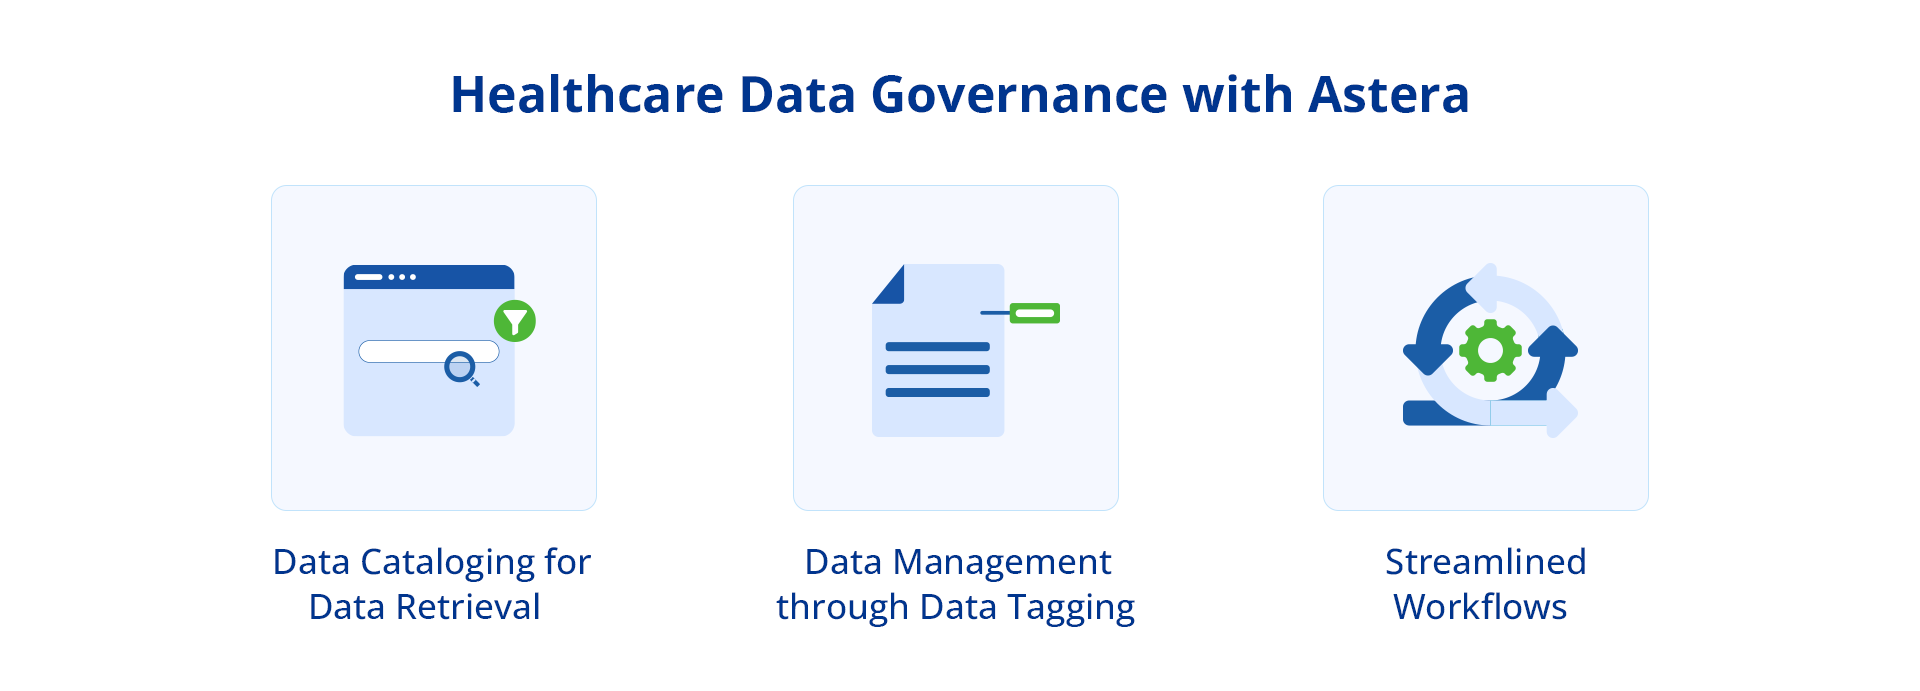 Healthcare Data Governance with Astera